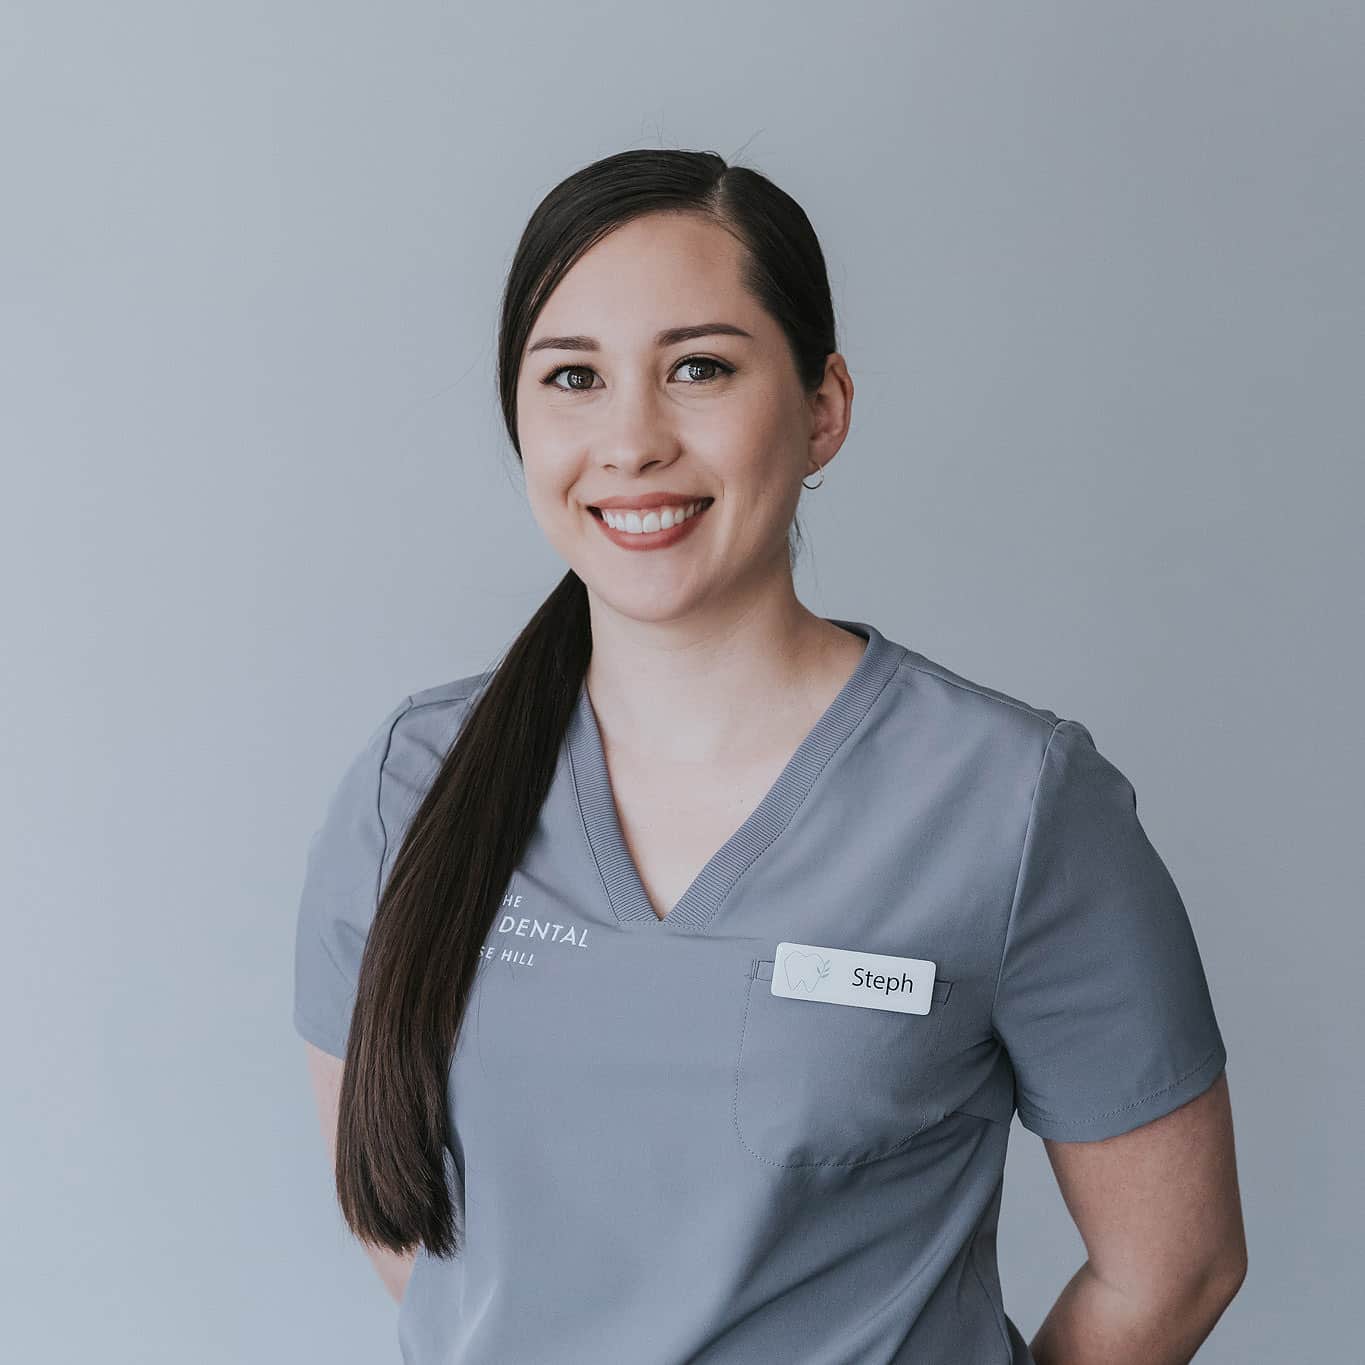 rouse hill dental assistant steph